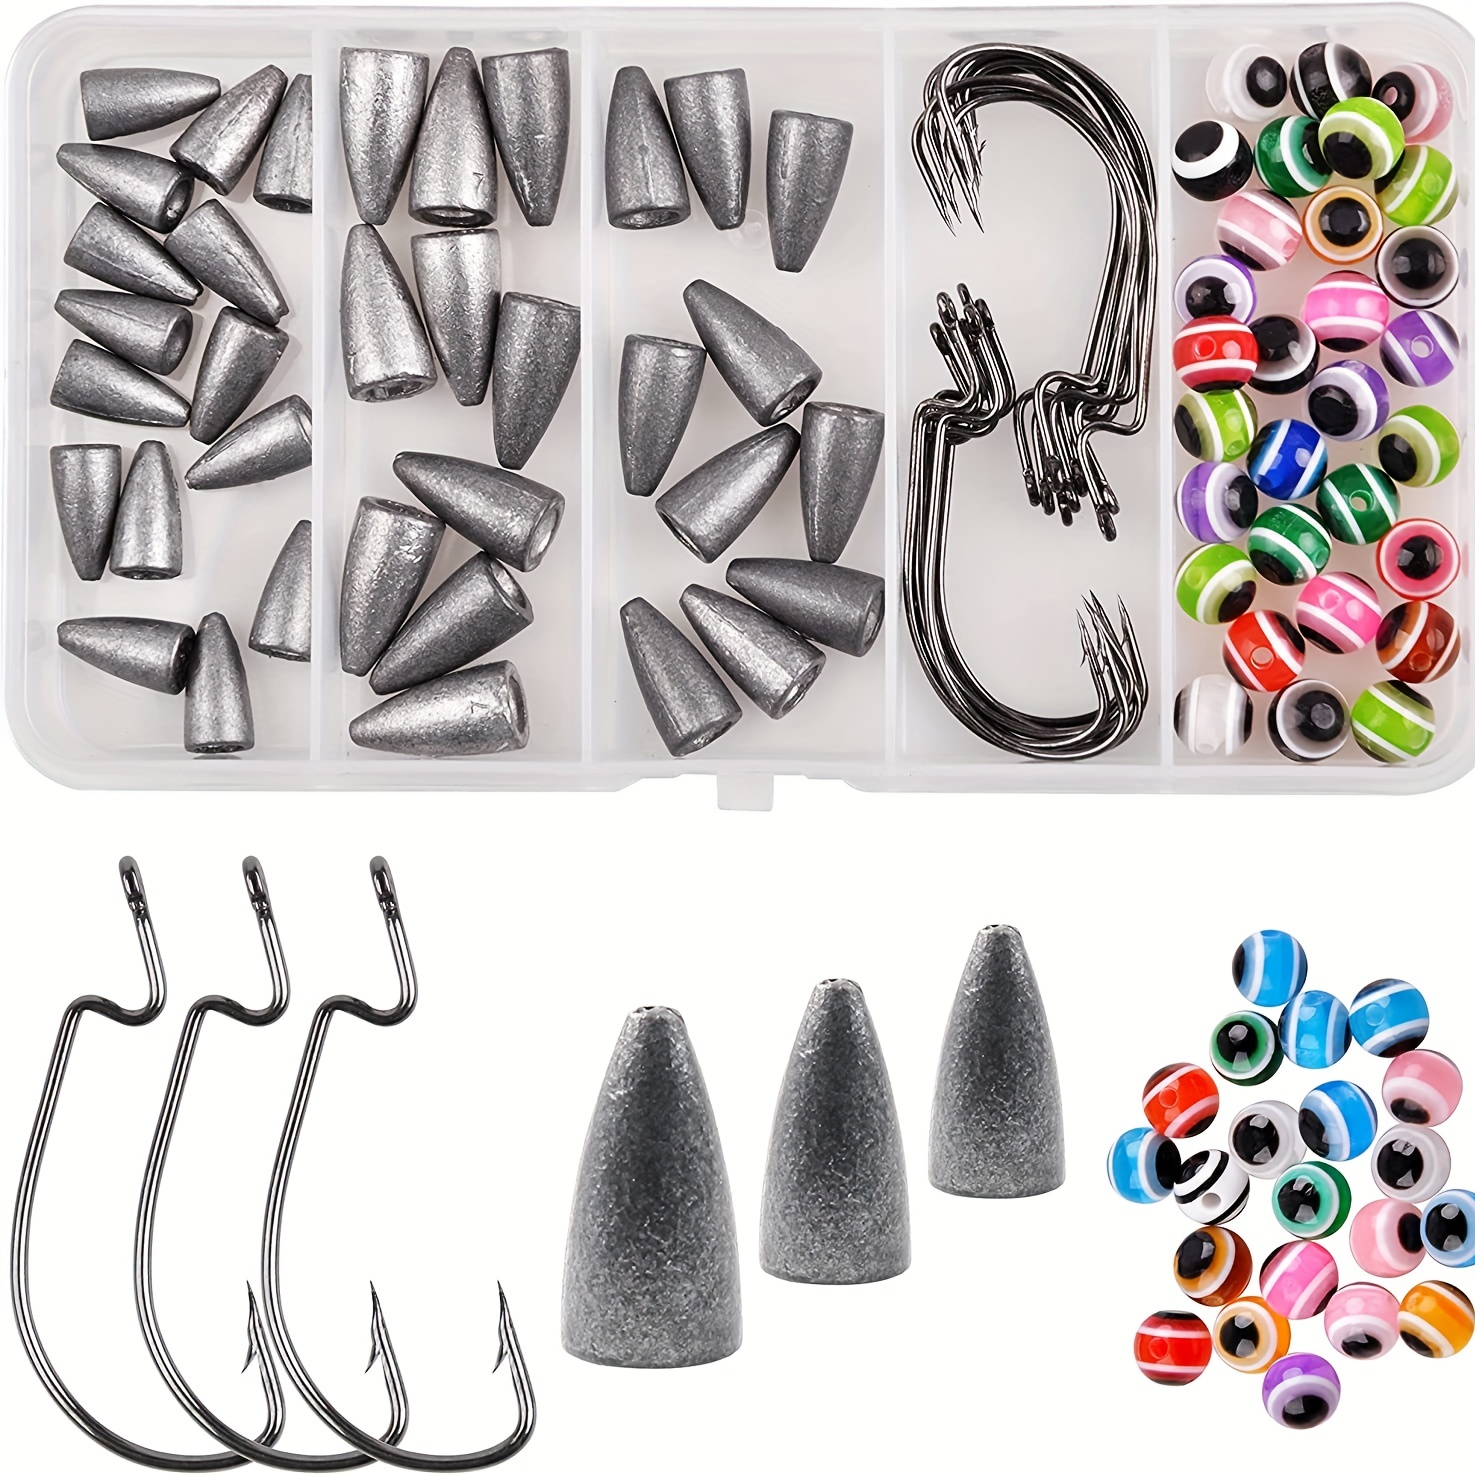  Bullet Weights Egg Sinkers Size 1/2 oz. 7 pc : Fishing Sinkers  : Sports & Outdoors